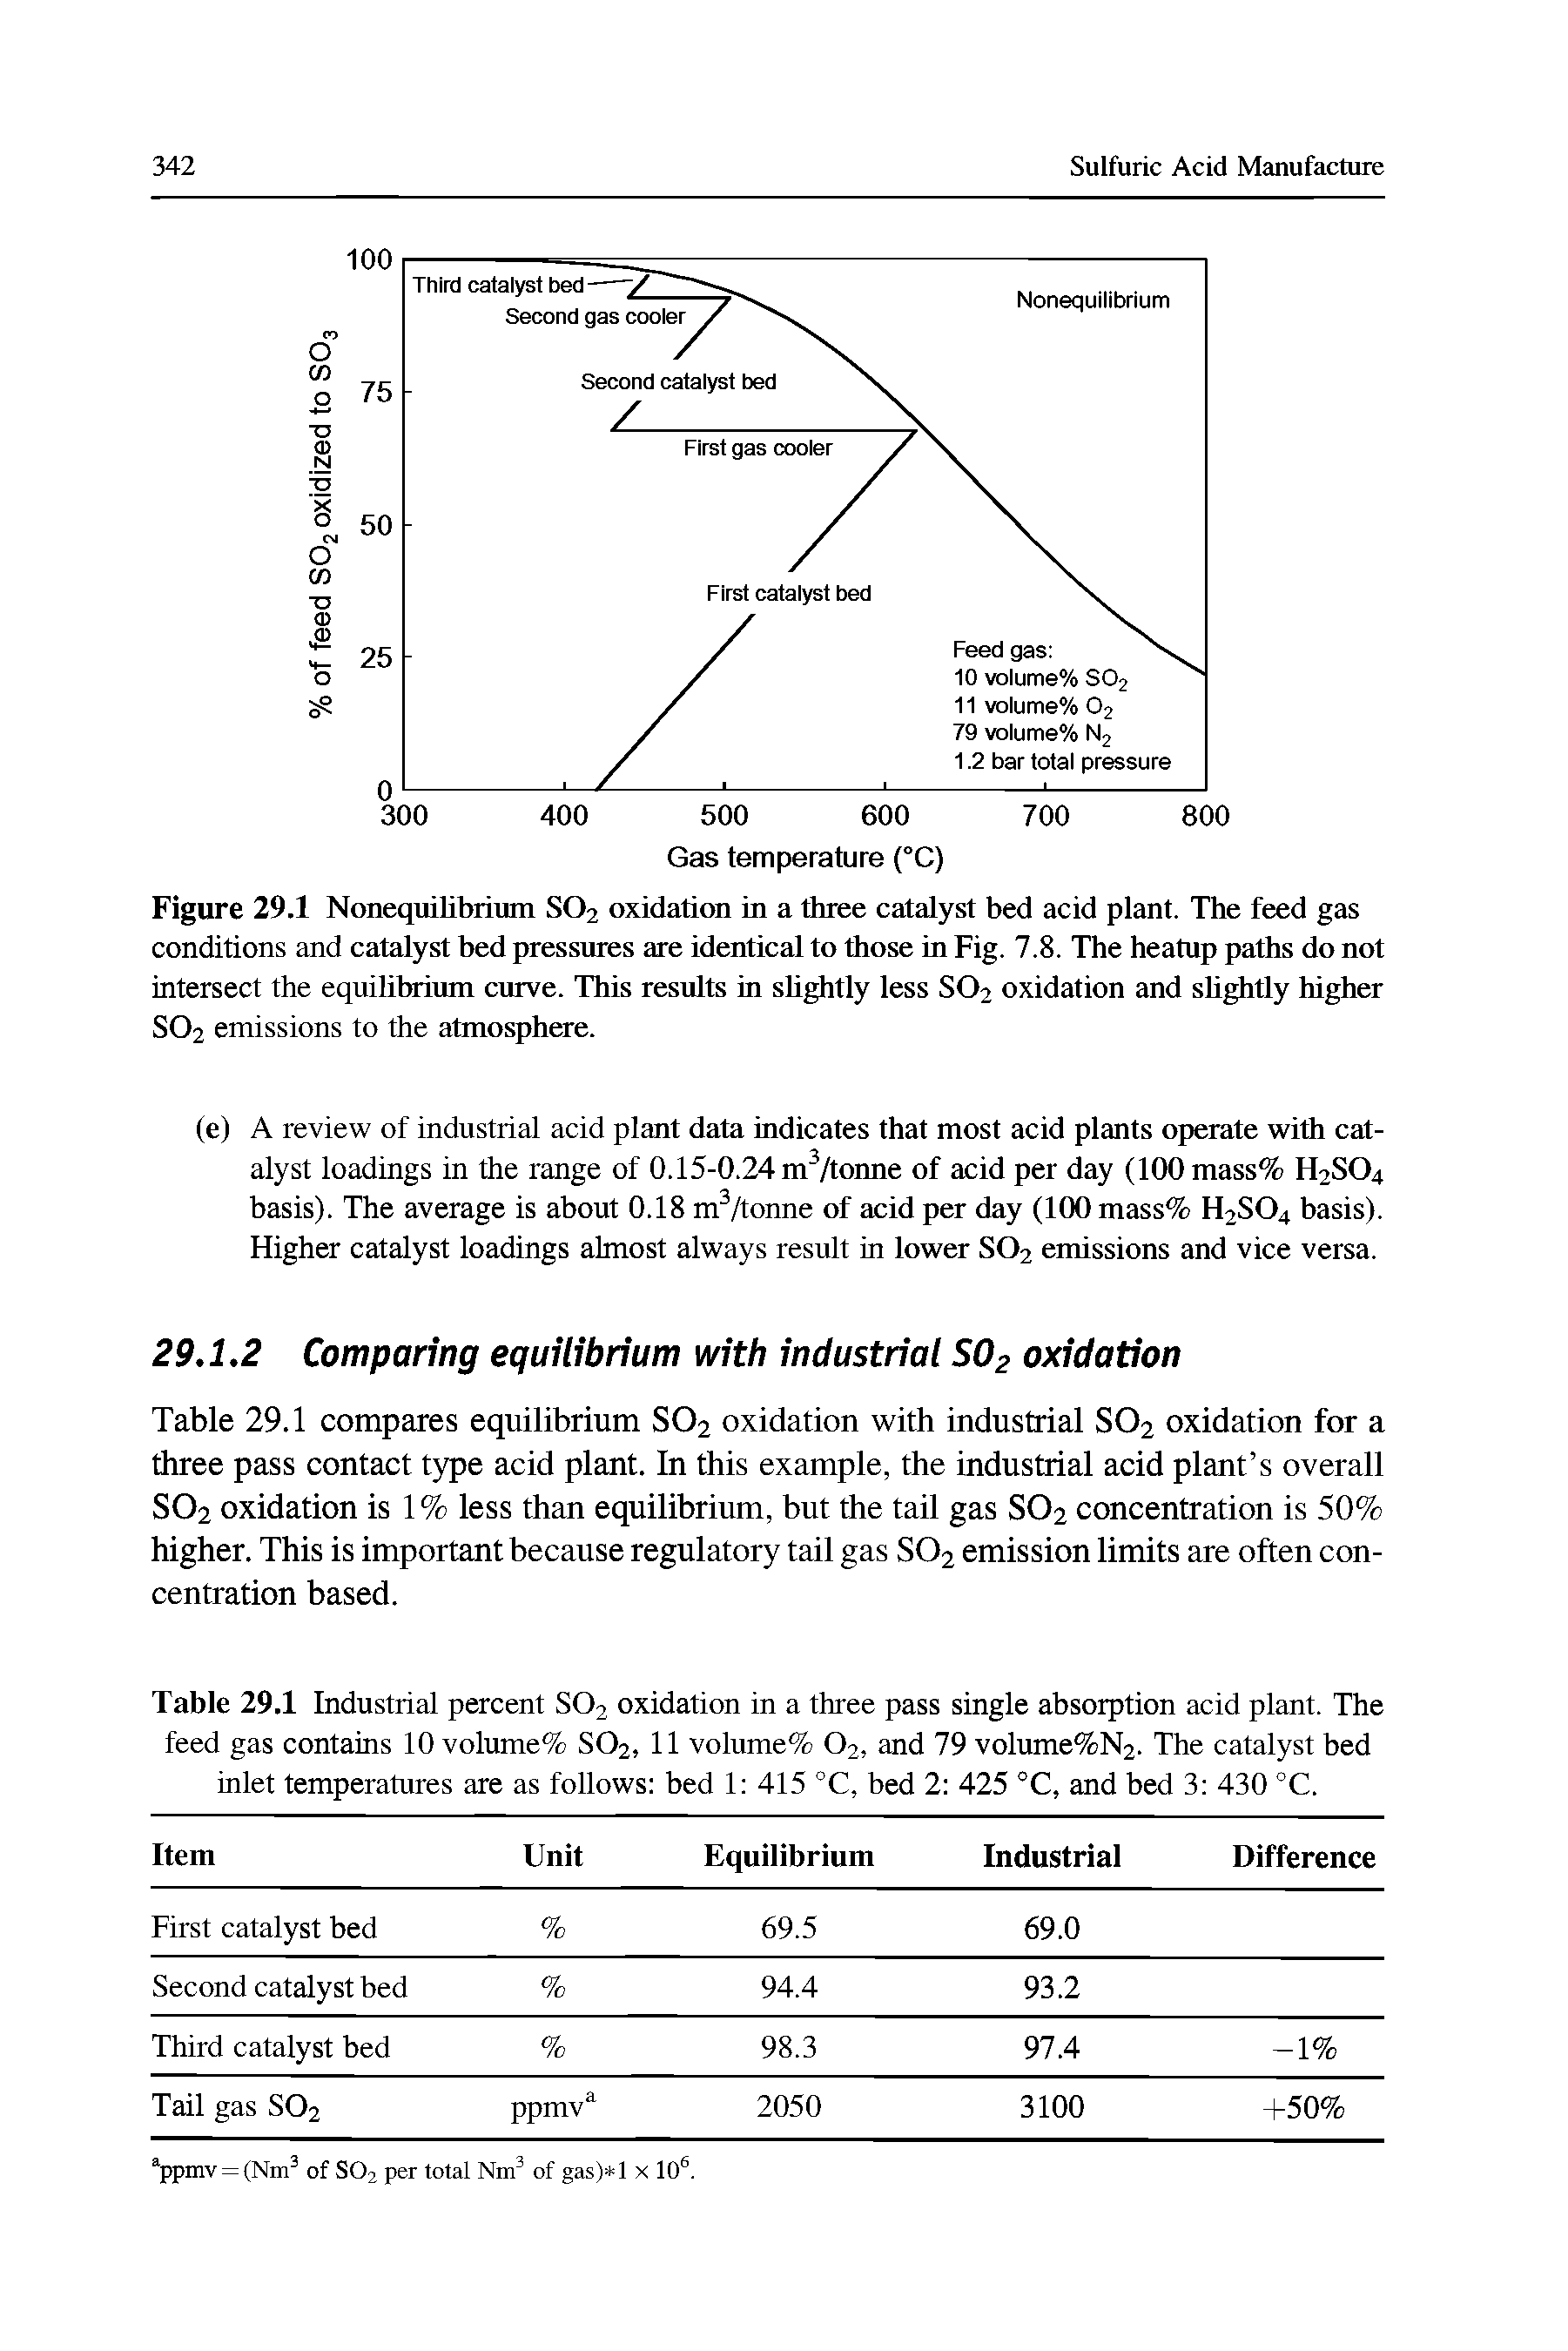 Figure 29.1 Nonequilibrium SO2 oxidation in a three catalyst bed acid plant. The feed gas conditions and catalyst bed pressures are identical to those in Fig. 7.8. The heatup paths do not intersect the equilibrium curve. This results in slightly less SO2 oxidation and slightly higher SO2 emissions to the atmosphere.